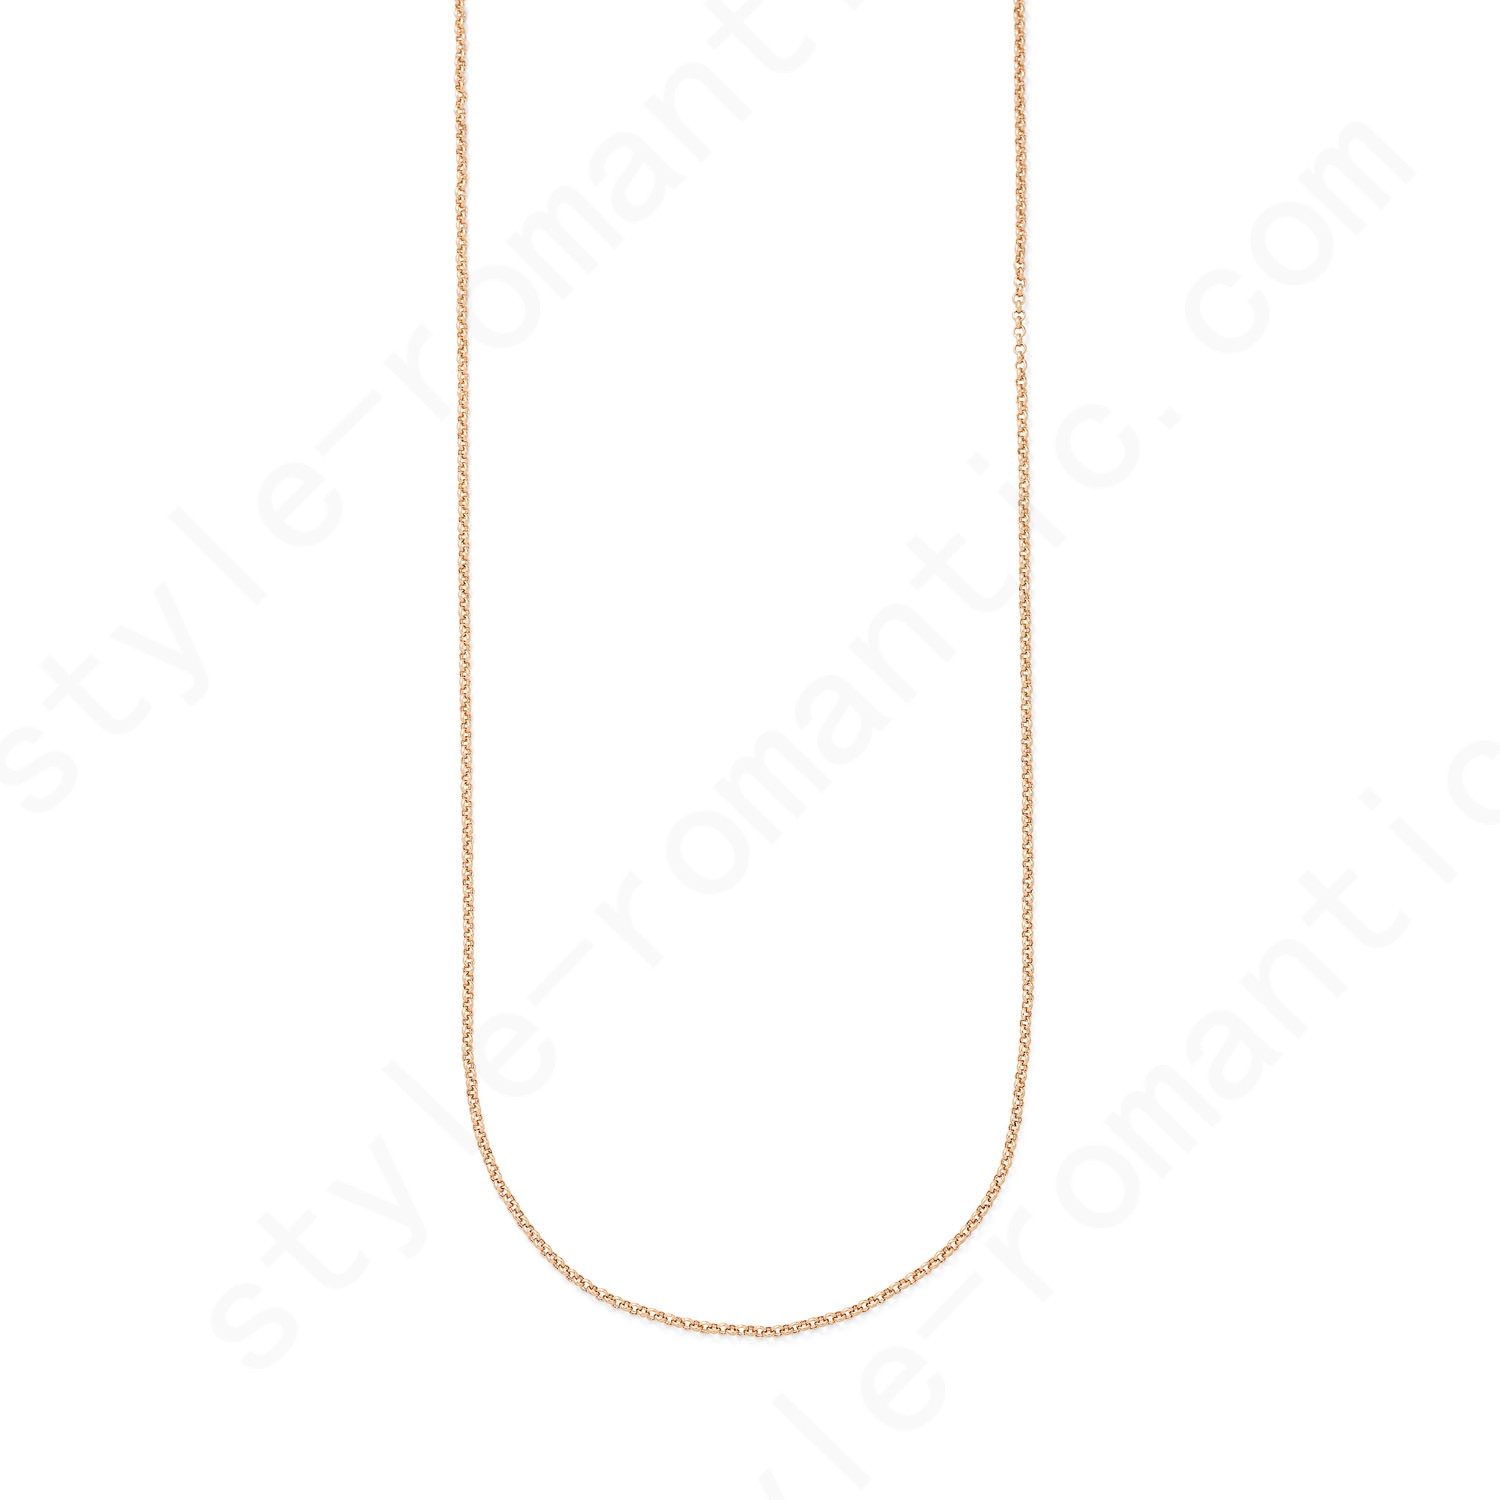 Thirty-One Gifts Dainty Rolo Chain - Inch - Gold Tone - Thirty-One Gifts Dainty Rolo Chain - Inch - Gold Tone